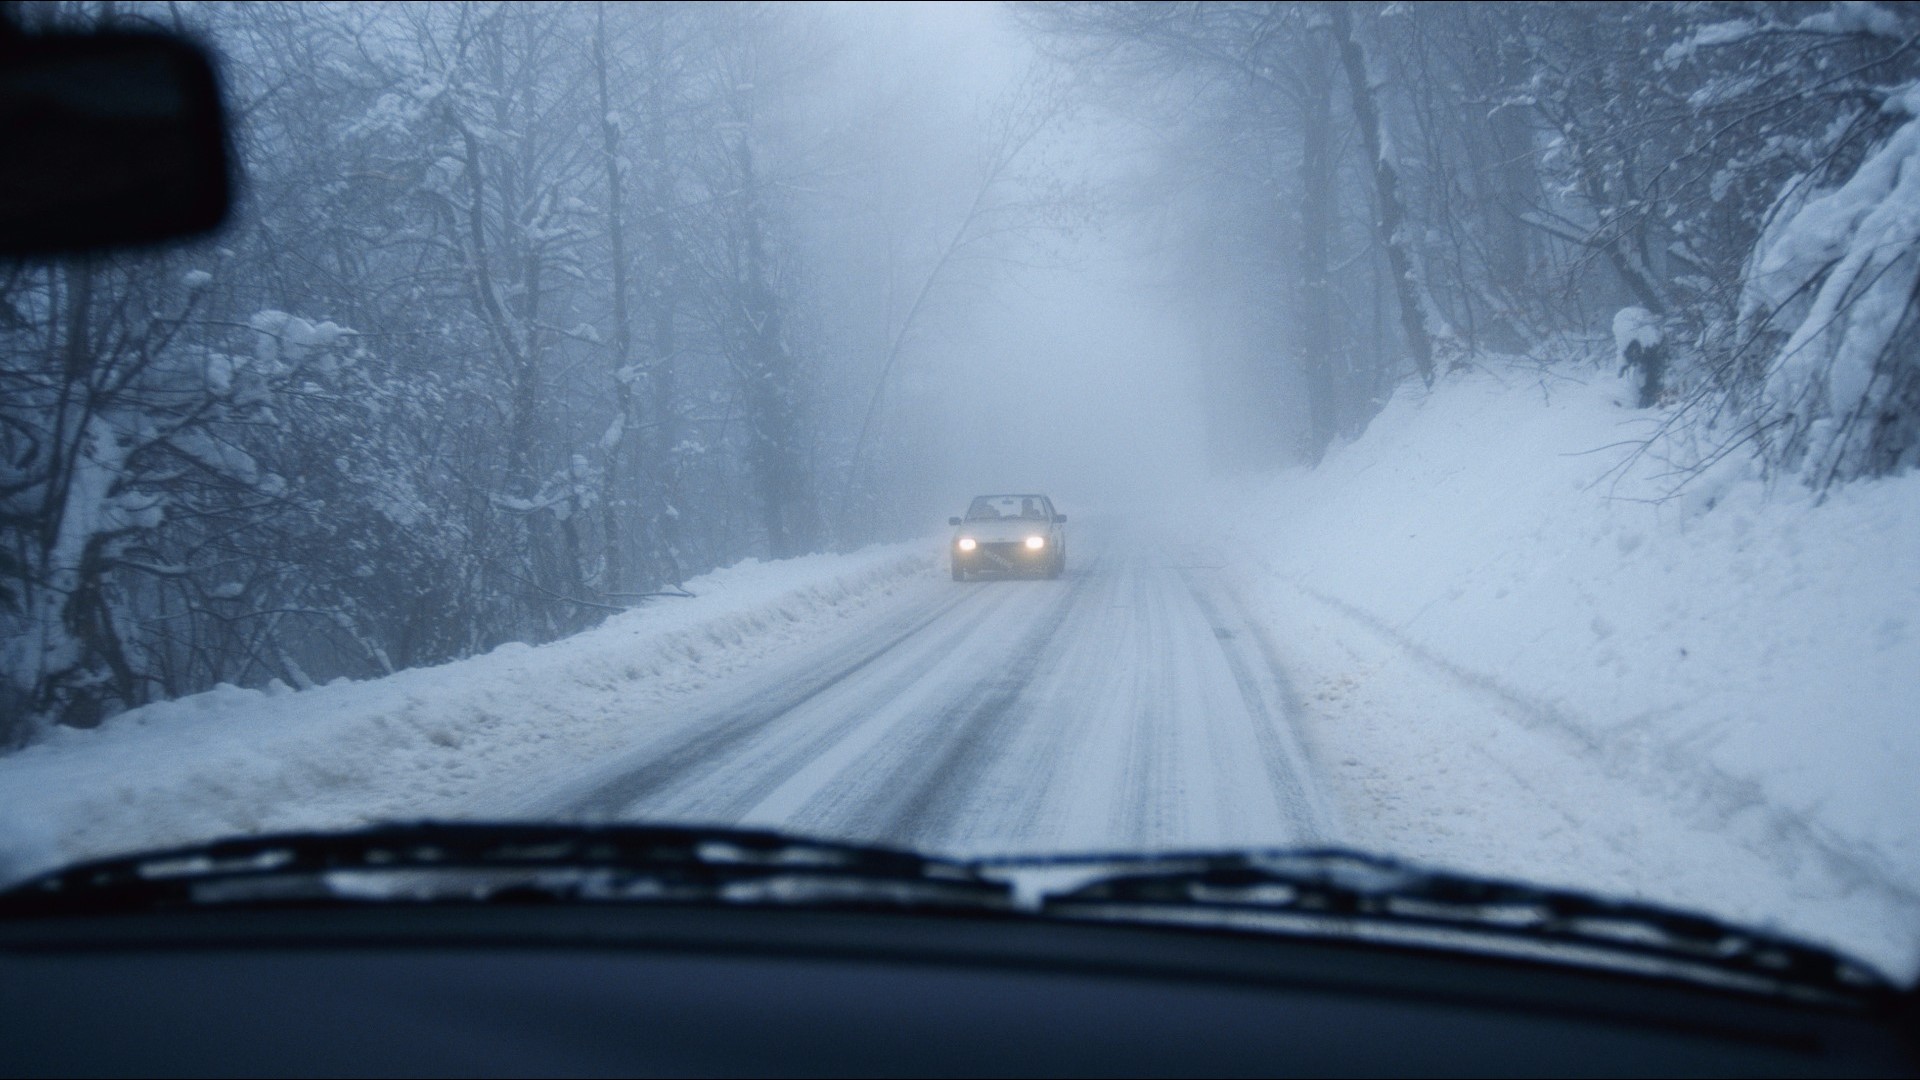 What to keep in your car in case of a snowy emergency